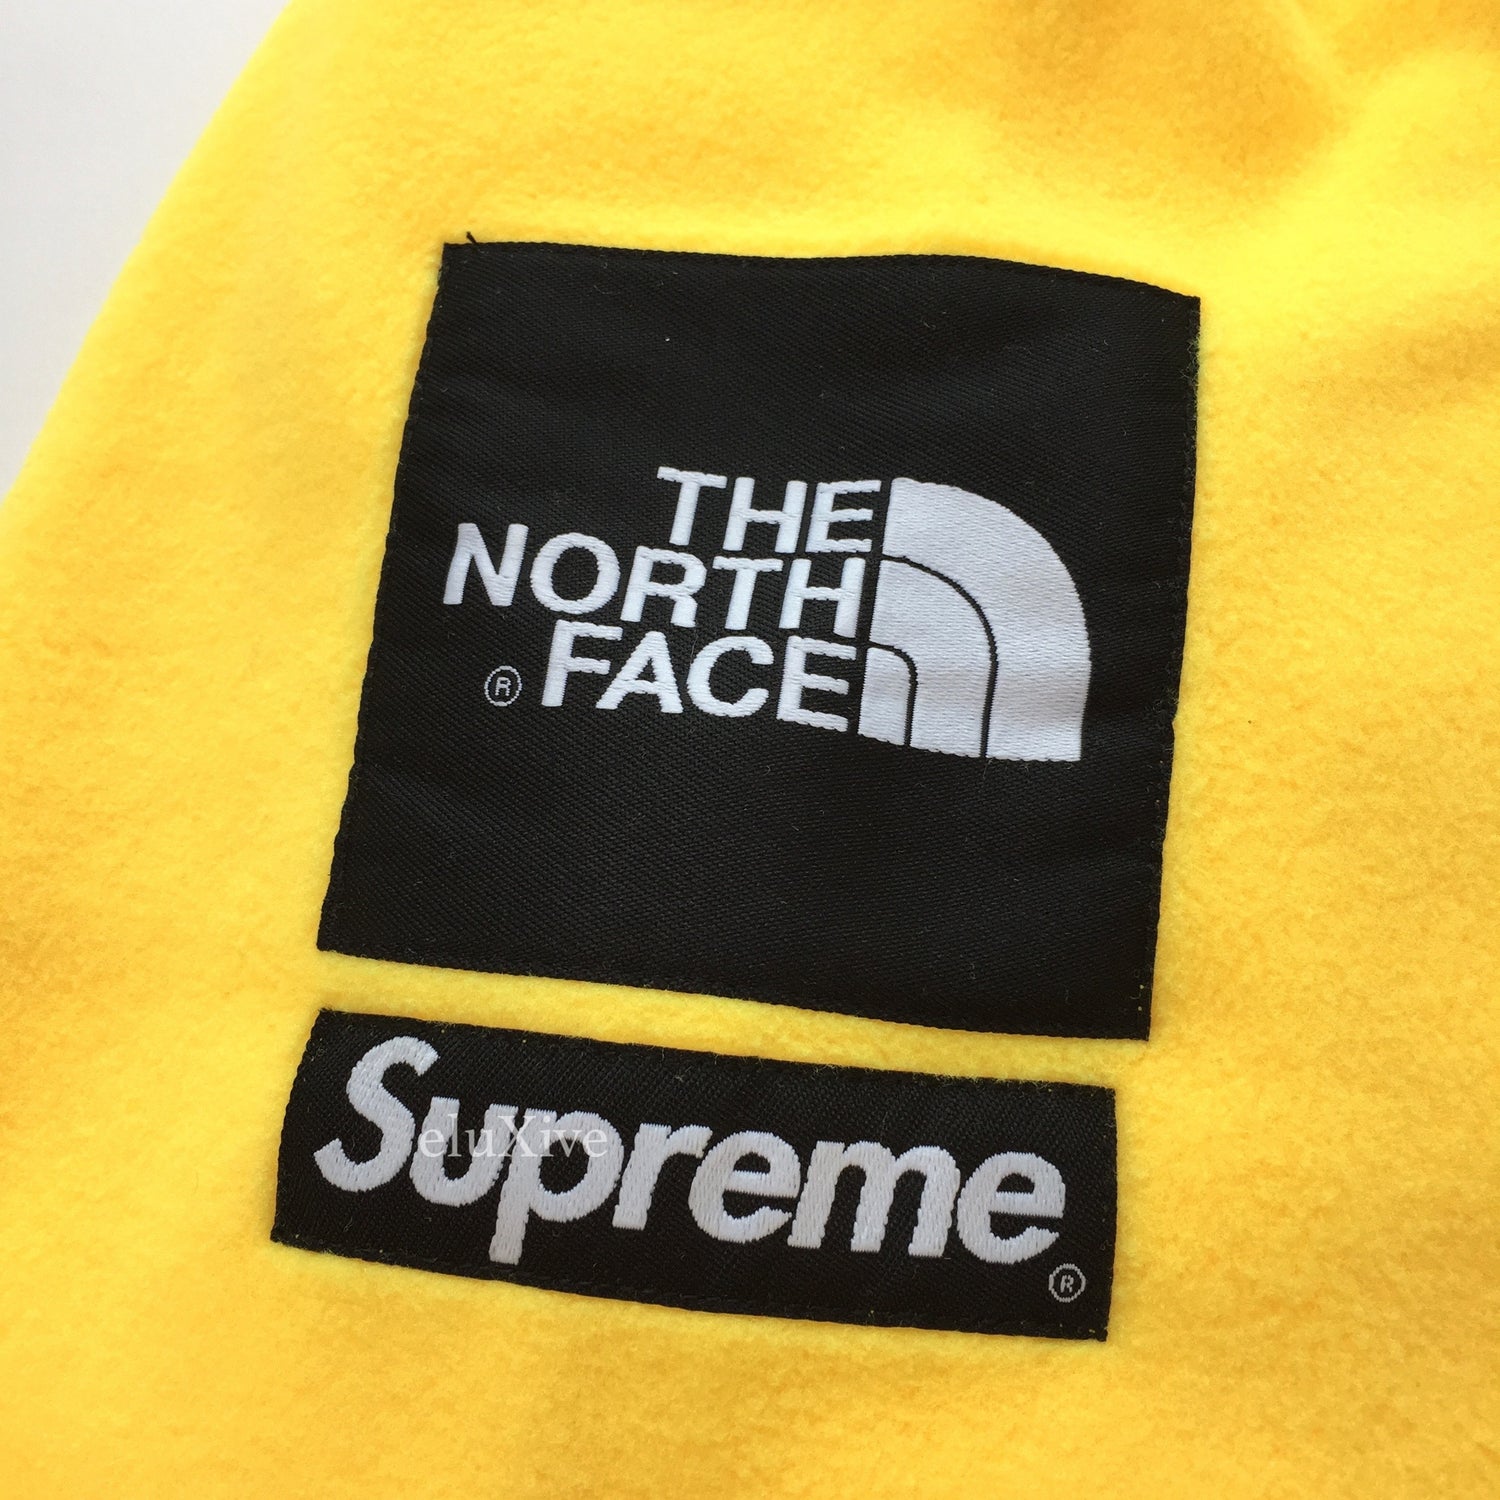 Supreme x The North Face Expedition Fleece Jacket Review (Week15